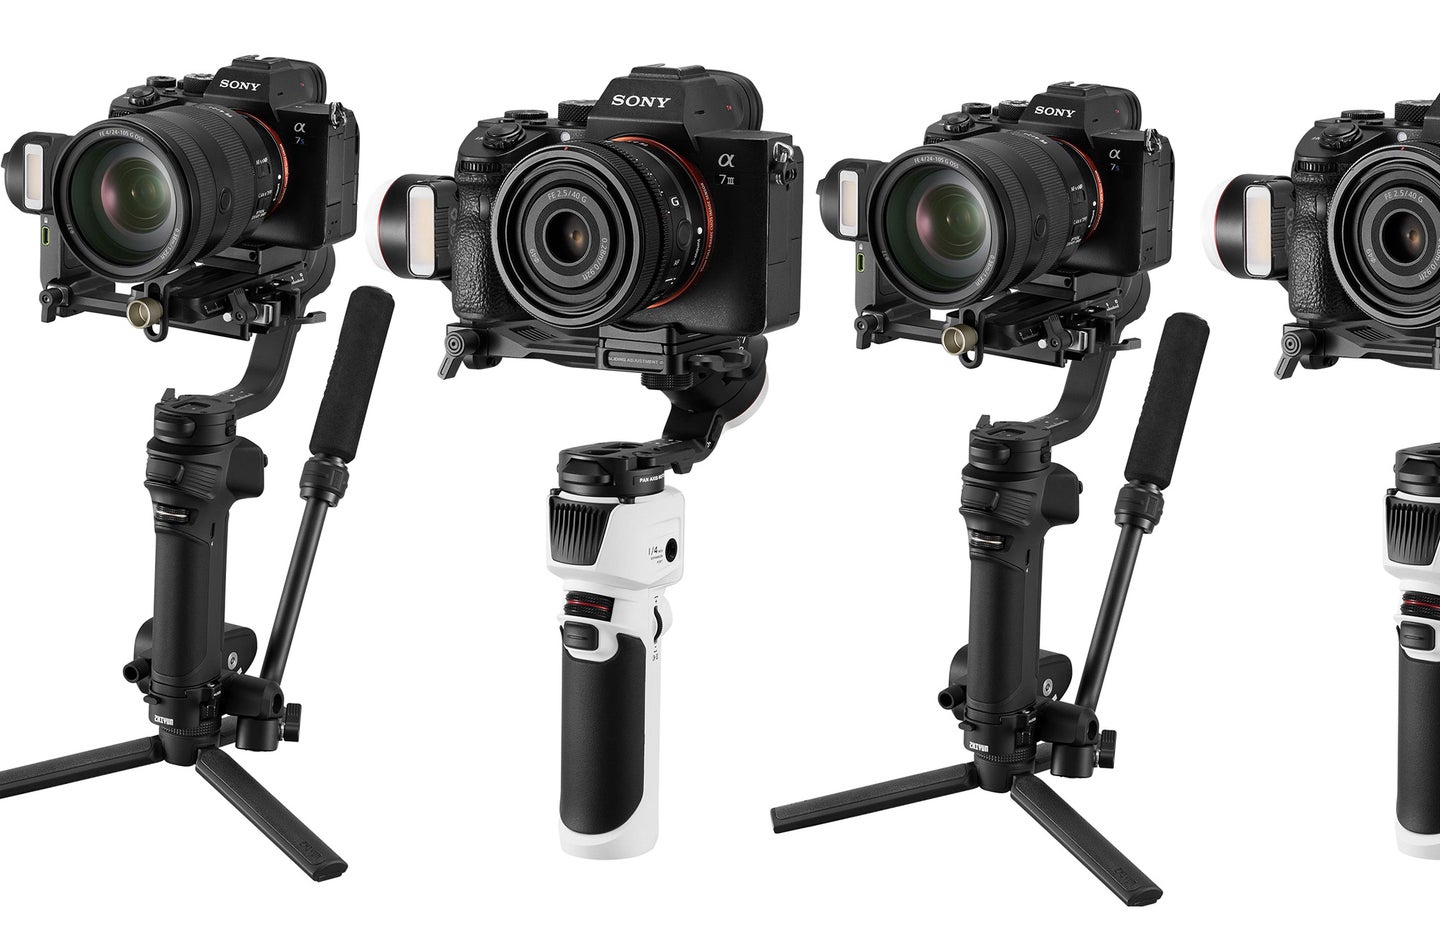 Zhiyun weebill 3 and crane-m3s gimbals on a white background with cameras mounted on them